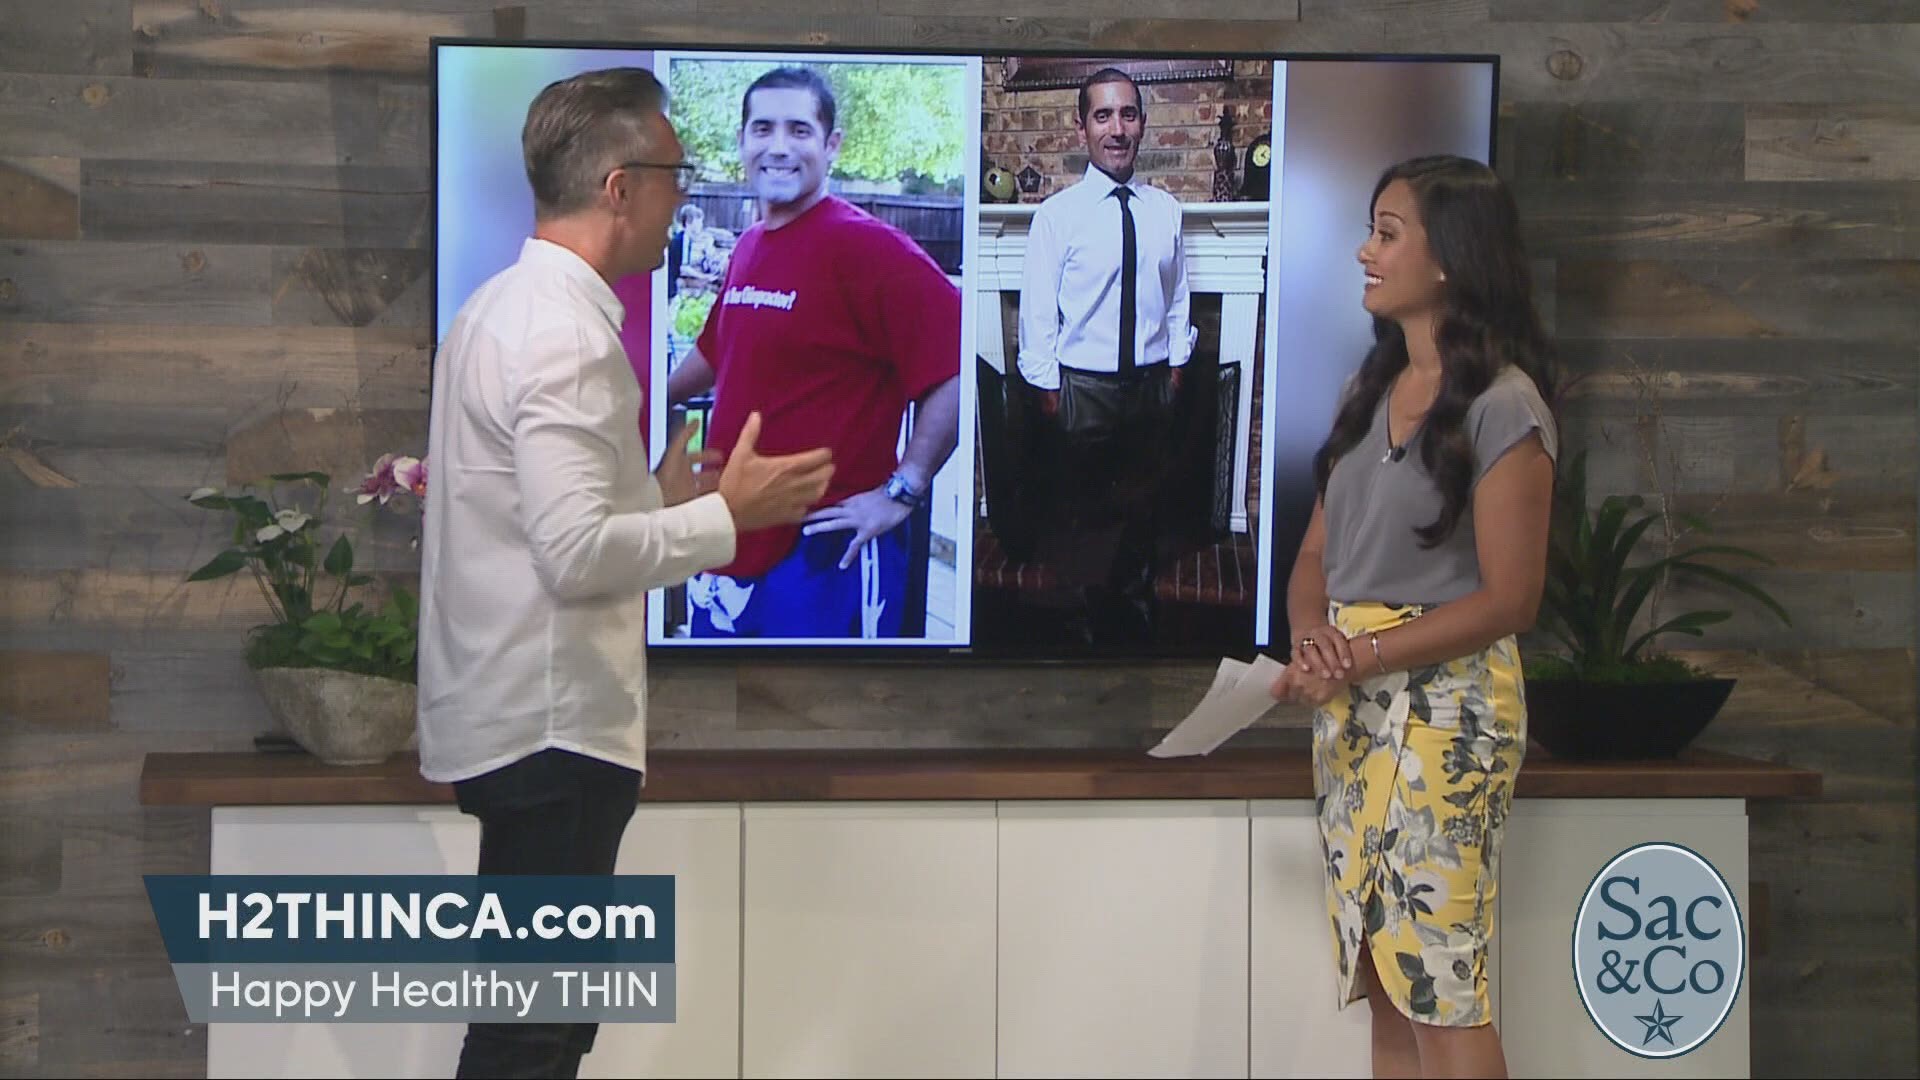 Aubrey Aquino chats with Dr. Randy Johns about how you get the body you’ve always wanted without dieting or exercising. The following is a paid segment sponsored by Happy Healthy Thin.